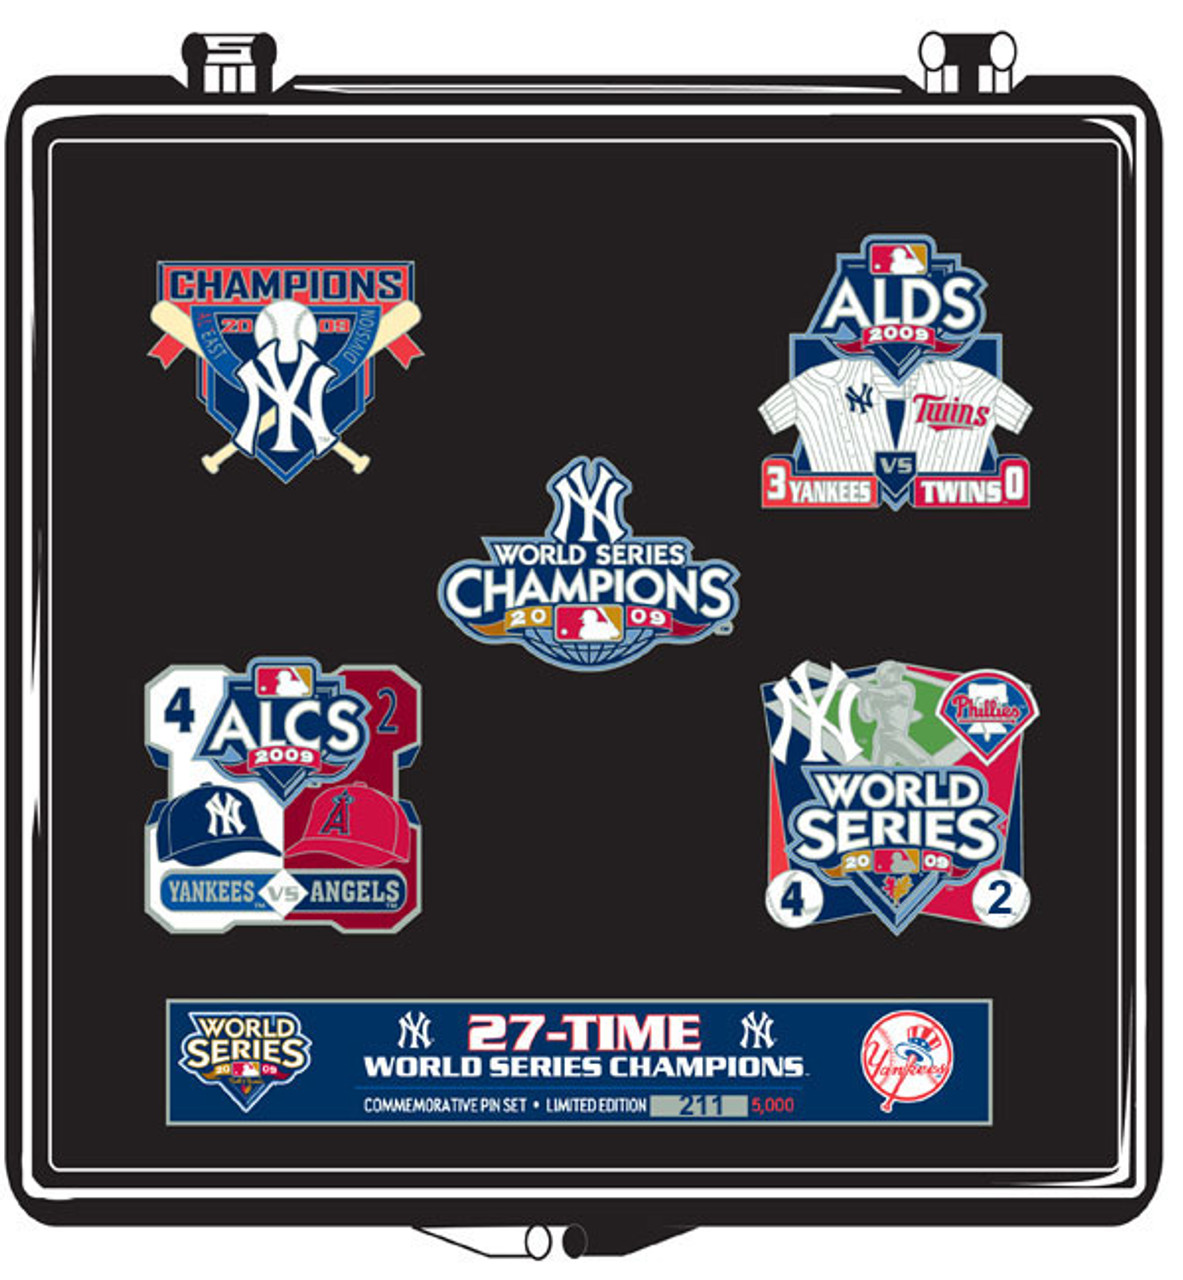 New York Yankees 2009 World Series Champs Pin Set - Limited 5,000